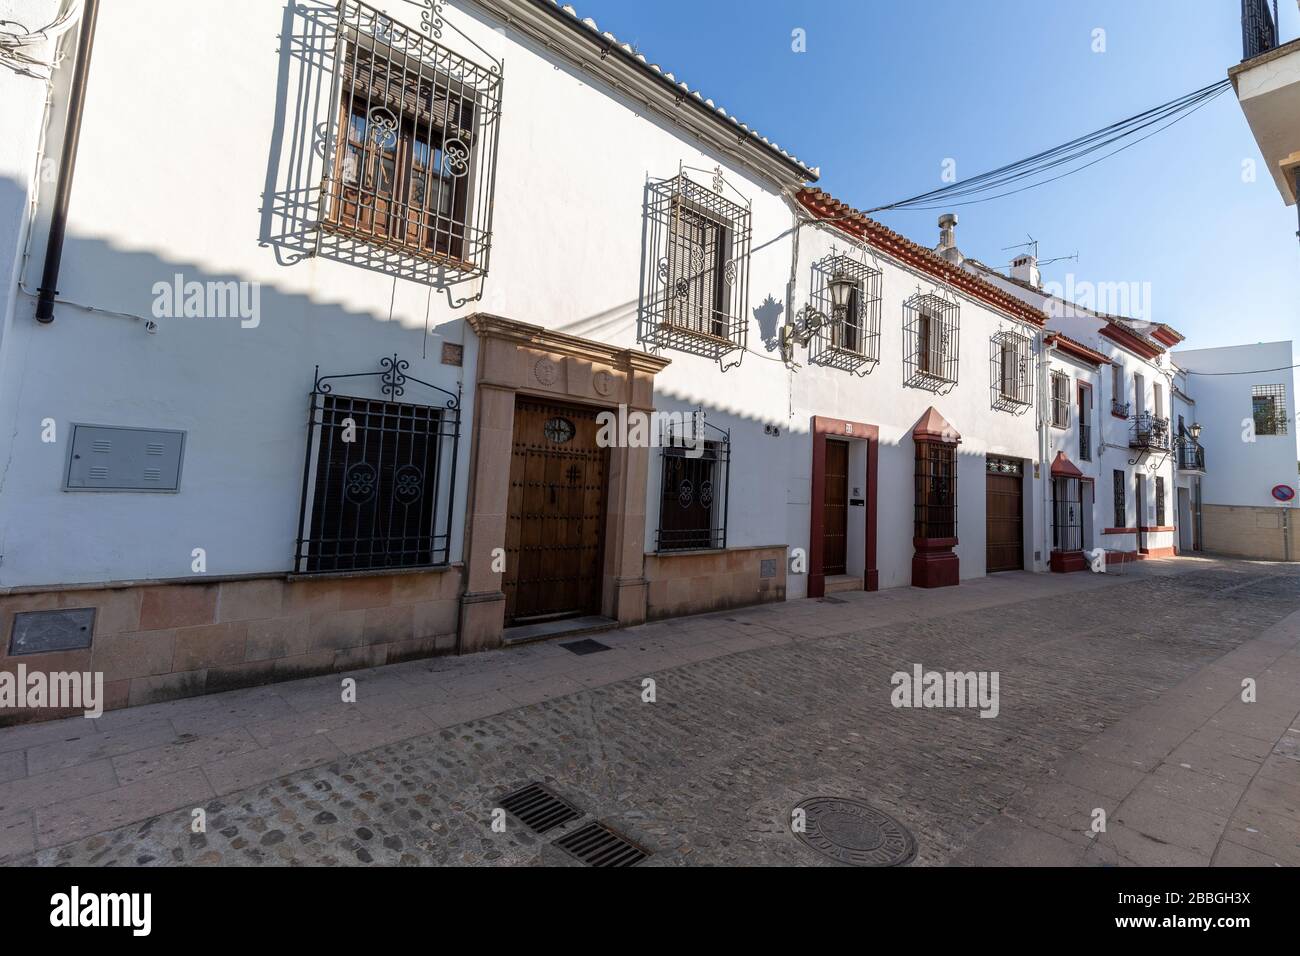 Houses in the old town of Ronda, one of the famous white towns of Andalusia, Spain. Stock Photo